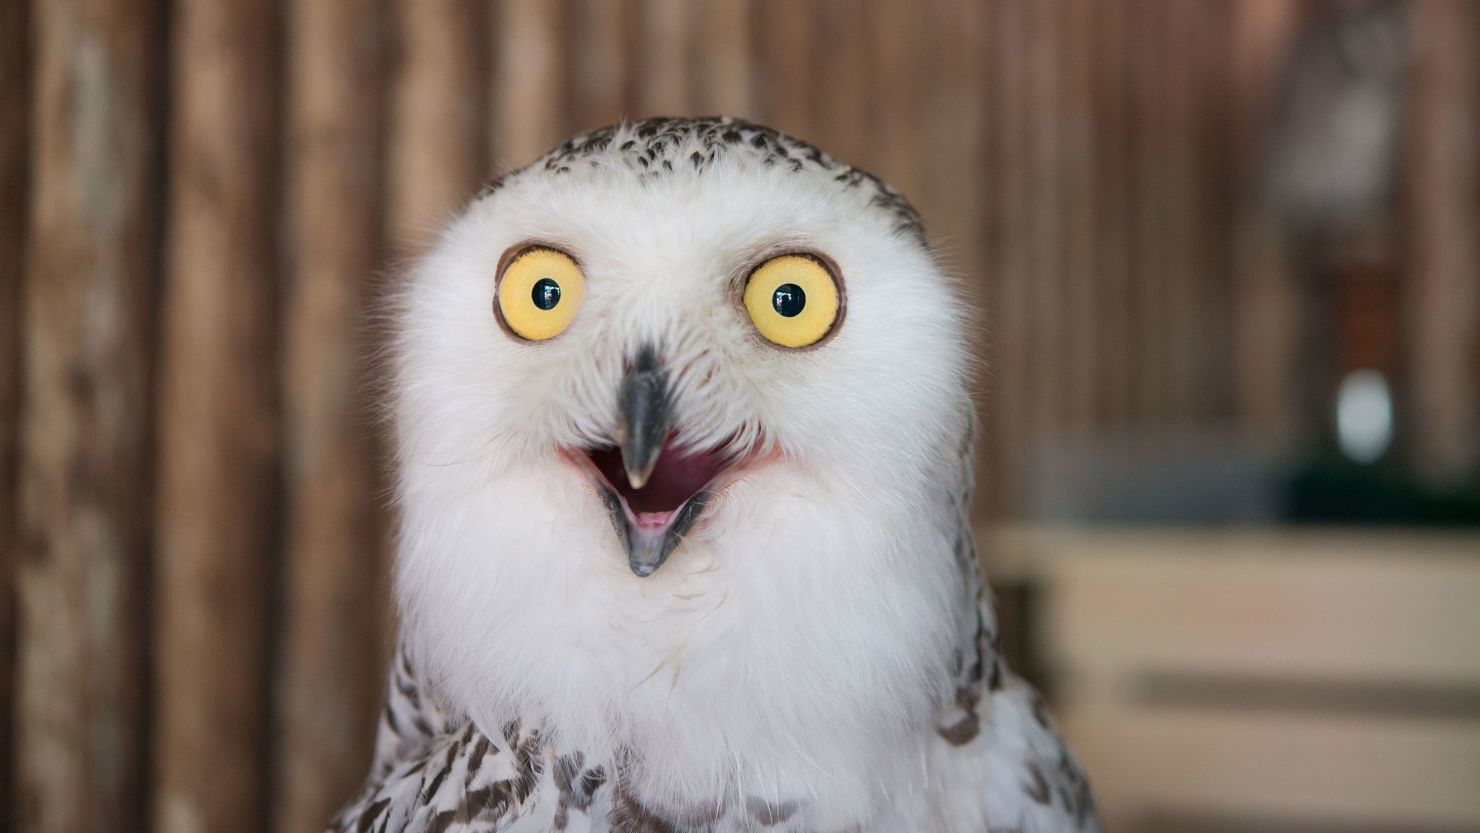 Owls are predatory creatures who take over the internet each year around the Super Bowl.